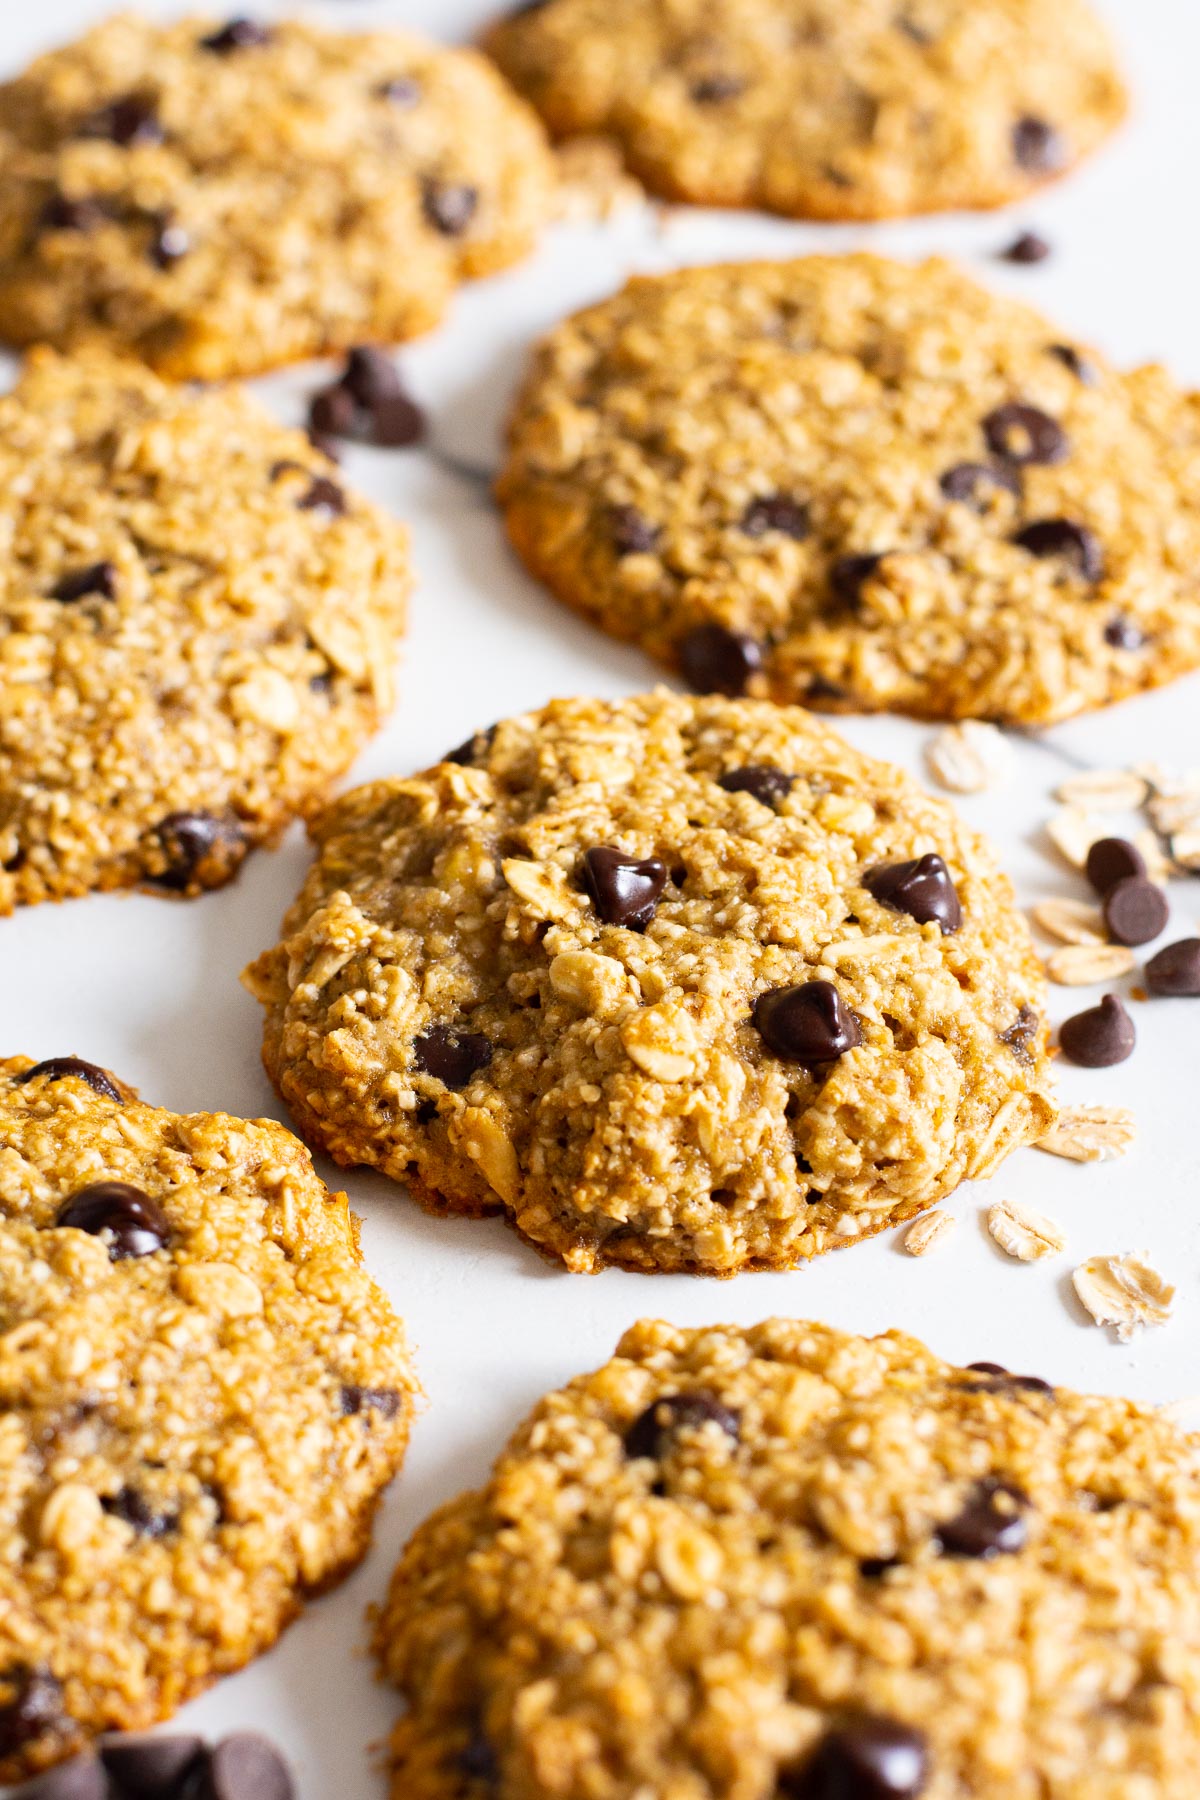 Healthy banana oatmeal cookies with chocolate chips and oats on counter.